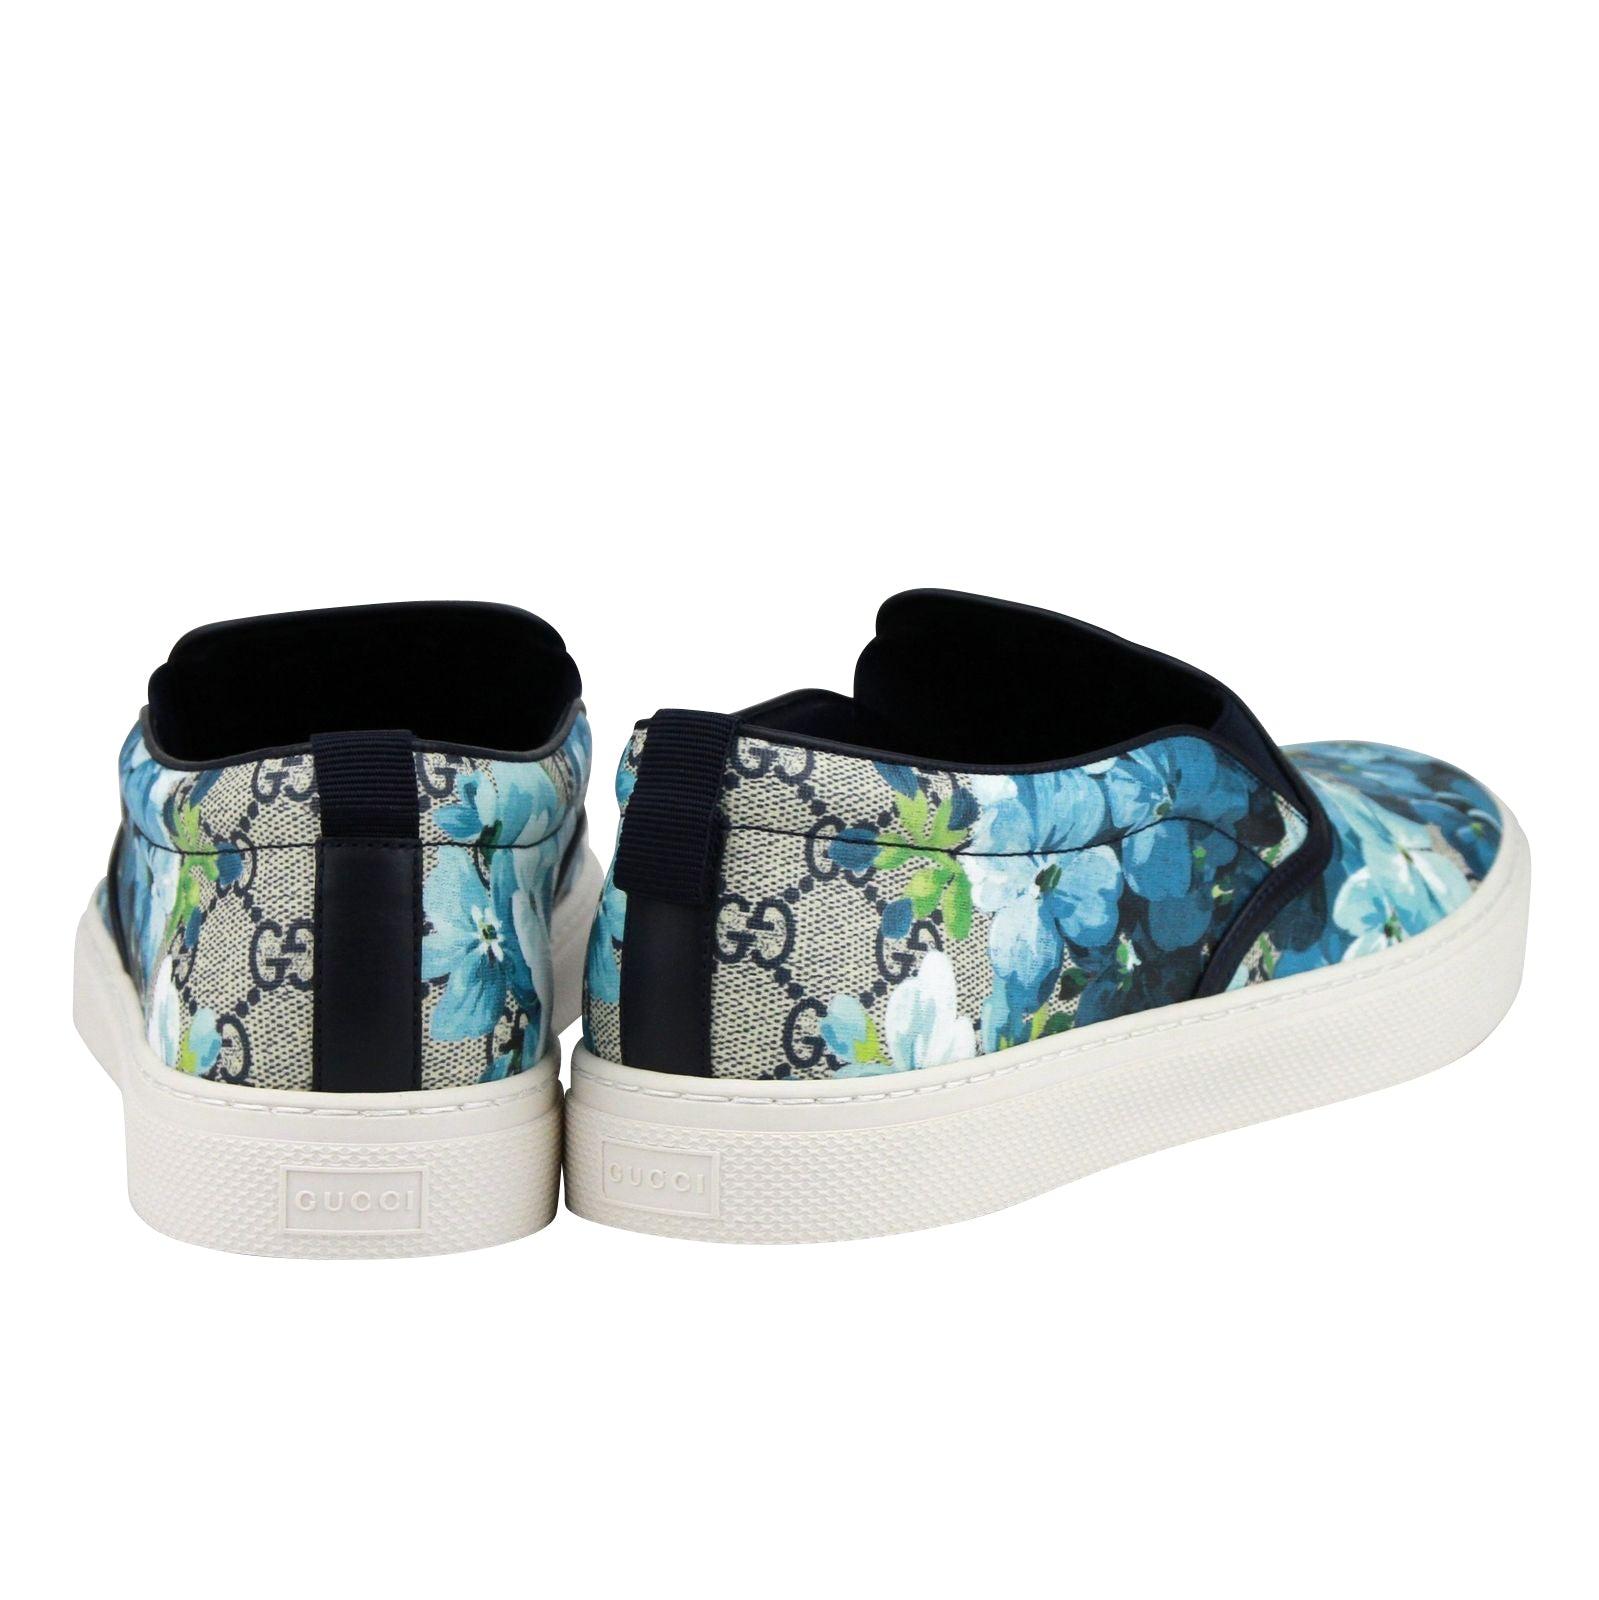 Gucci Bloom Flower Print gg Supreme Coated Canvas Slip Sneakers 